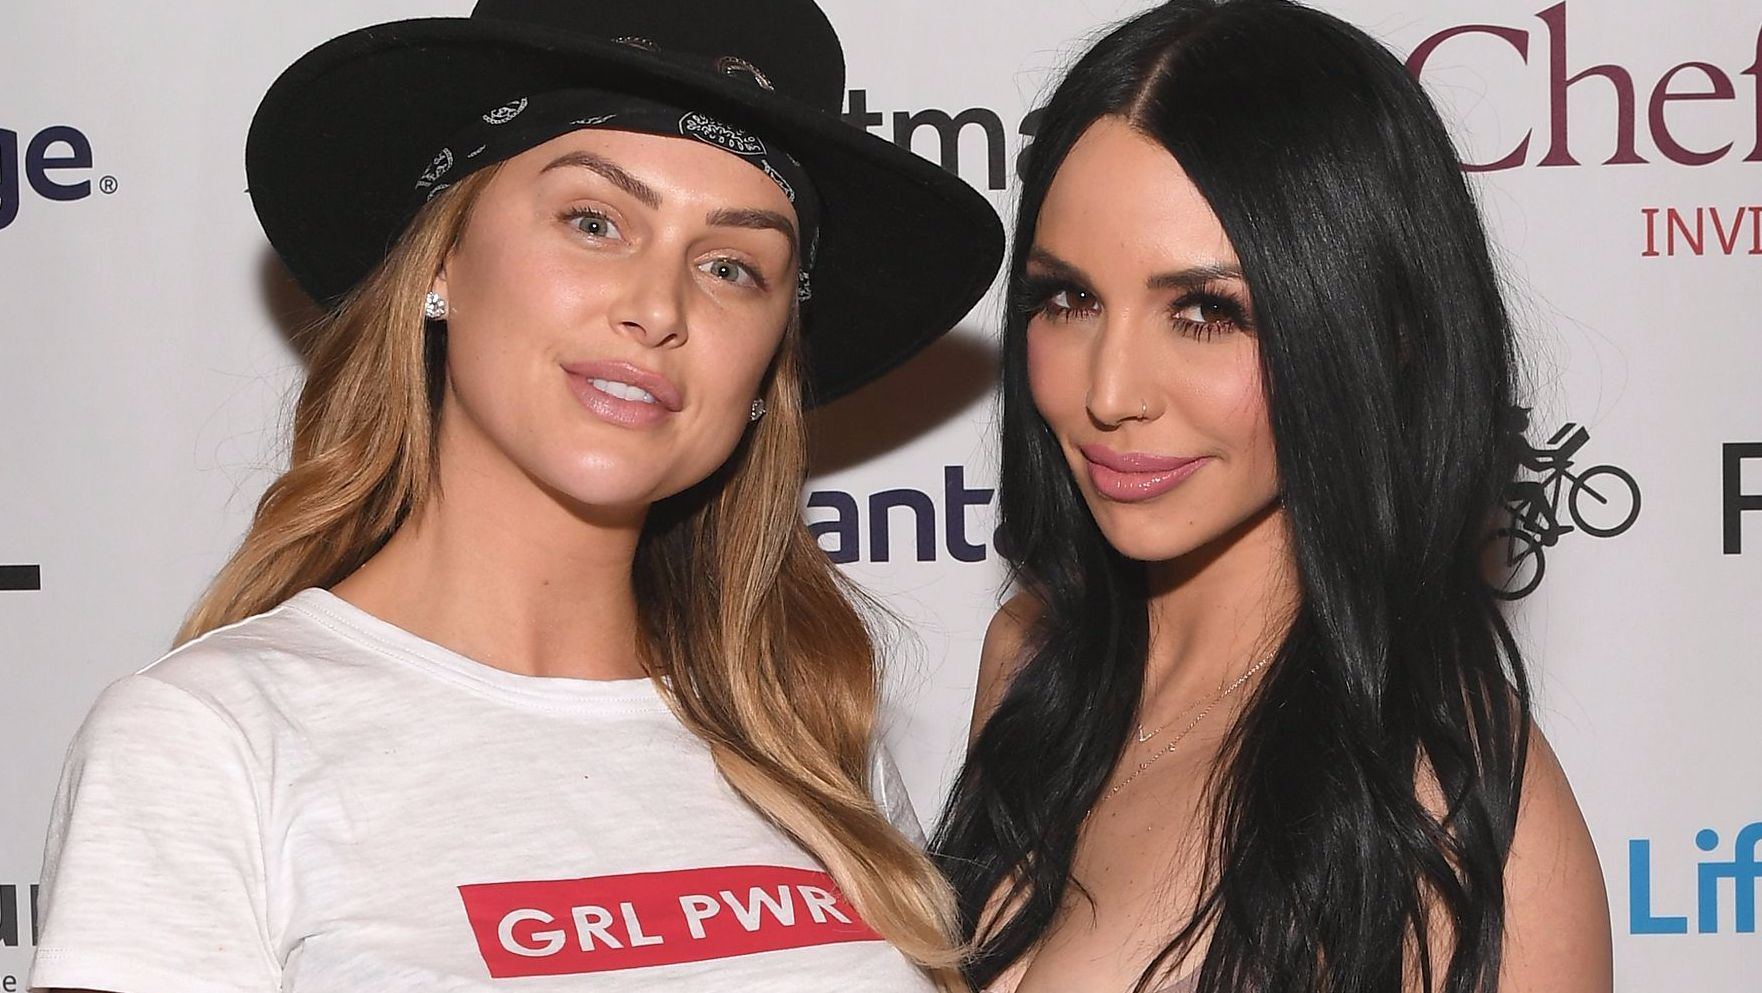 Lala Kent wears a 'GRL PWR' T-shirt and hat next to Scheana Shay.